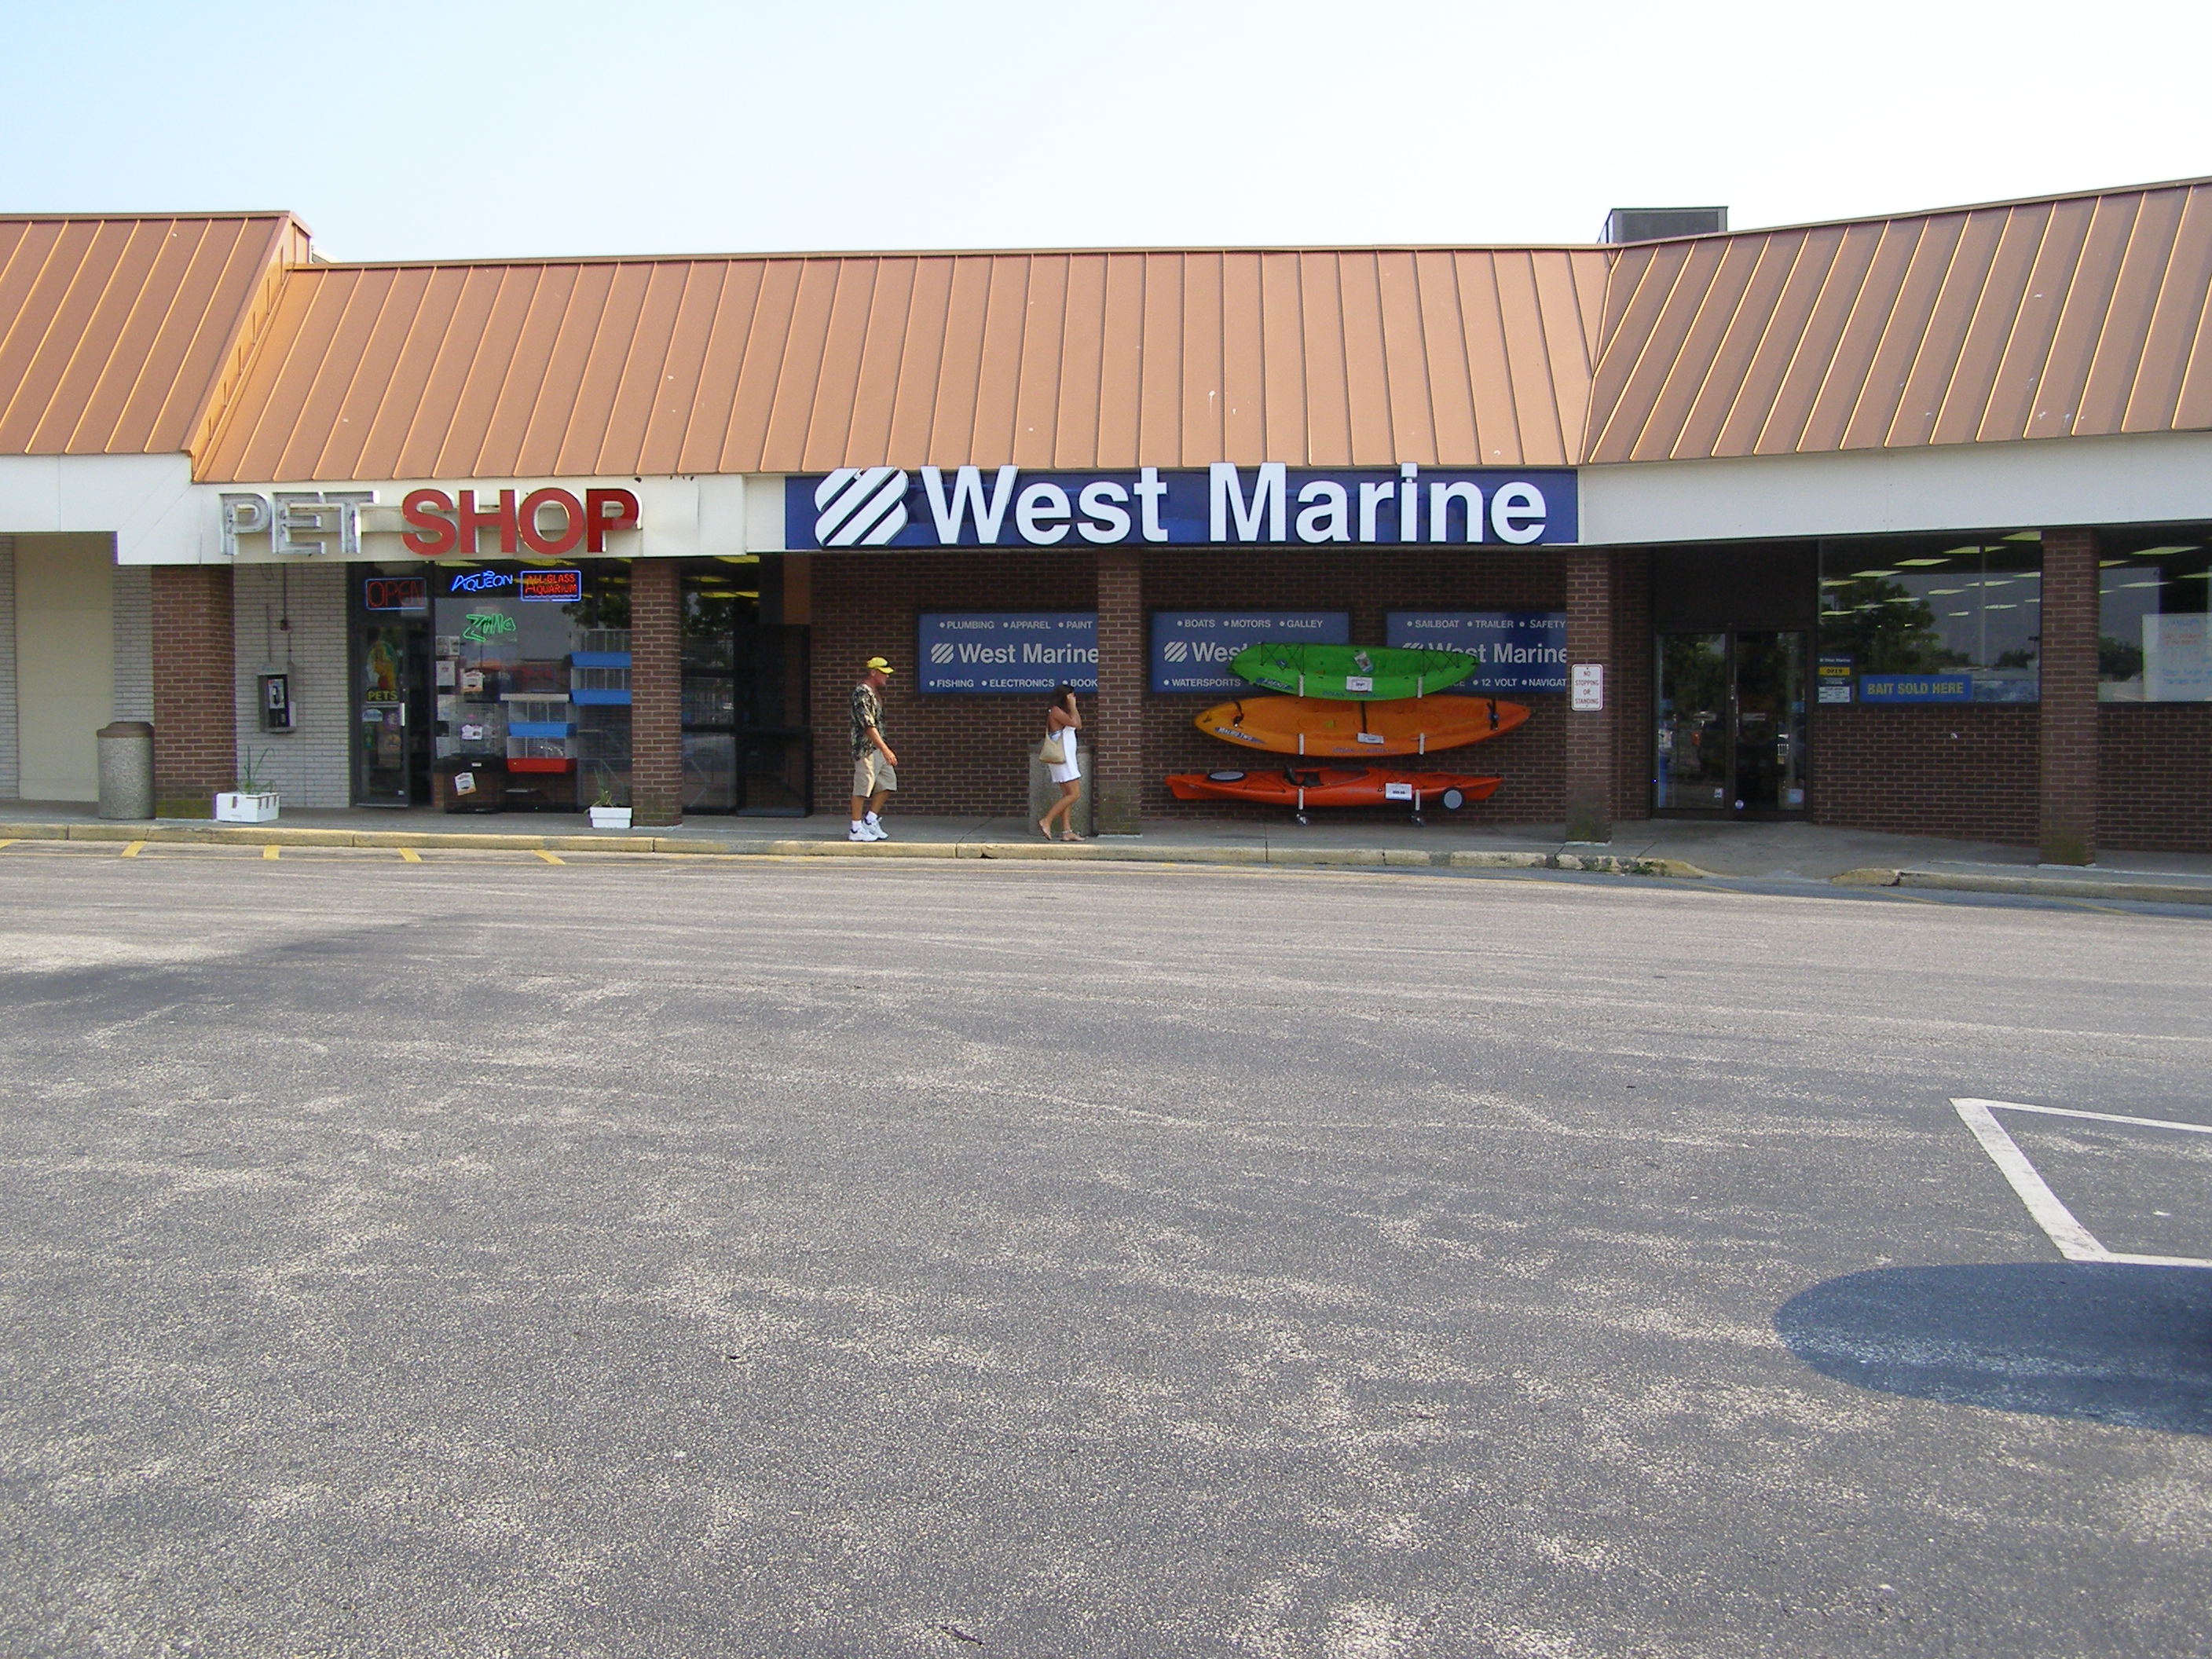 Boat Supplies, Fishing Gear & More - Somers Point, NJ 08244